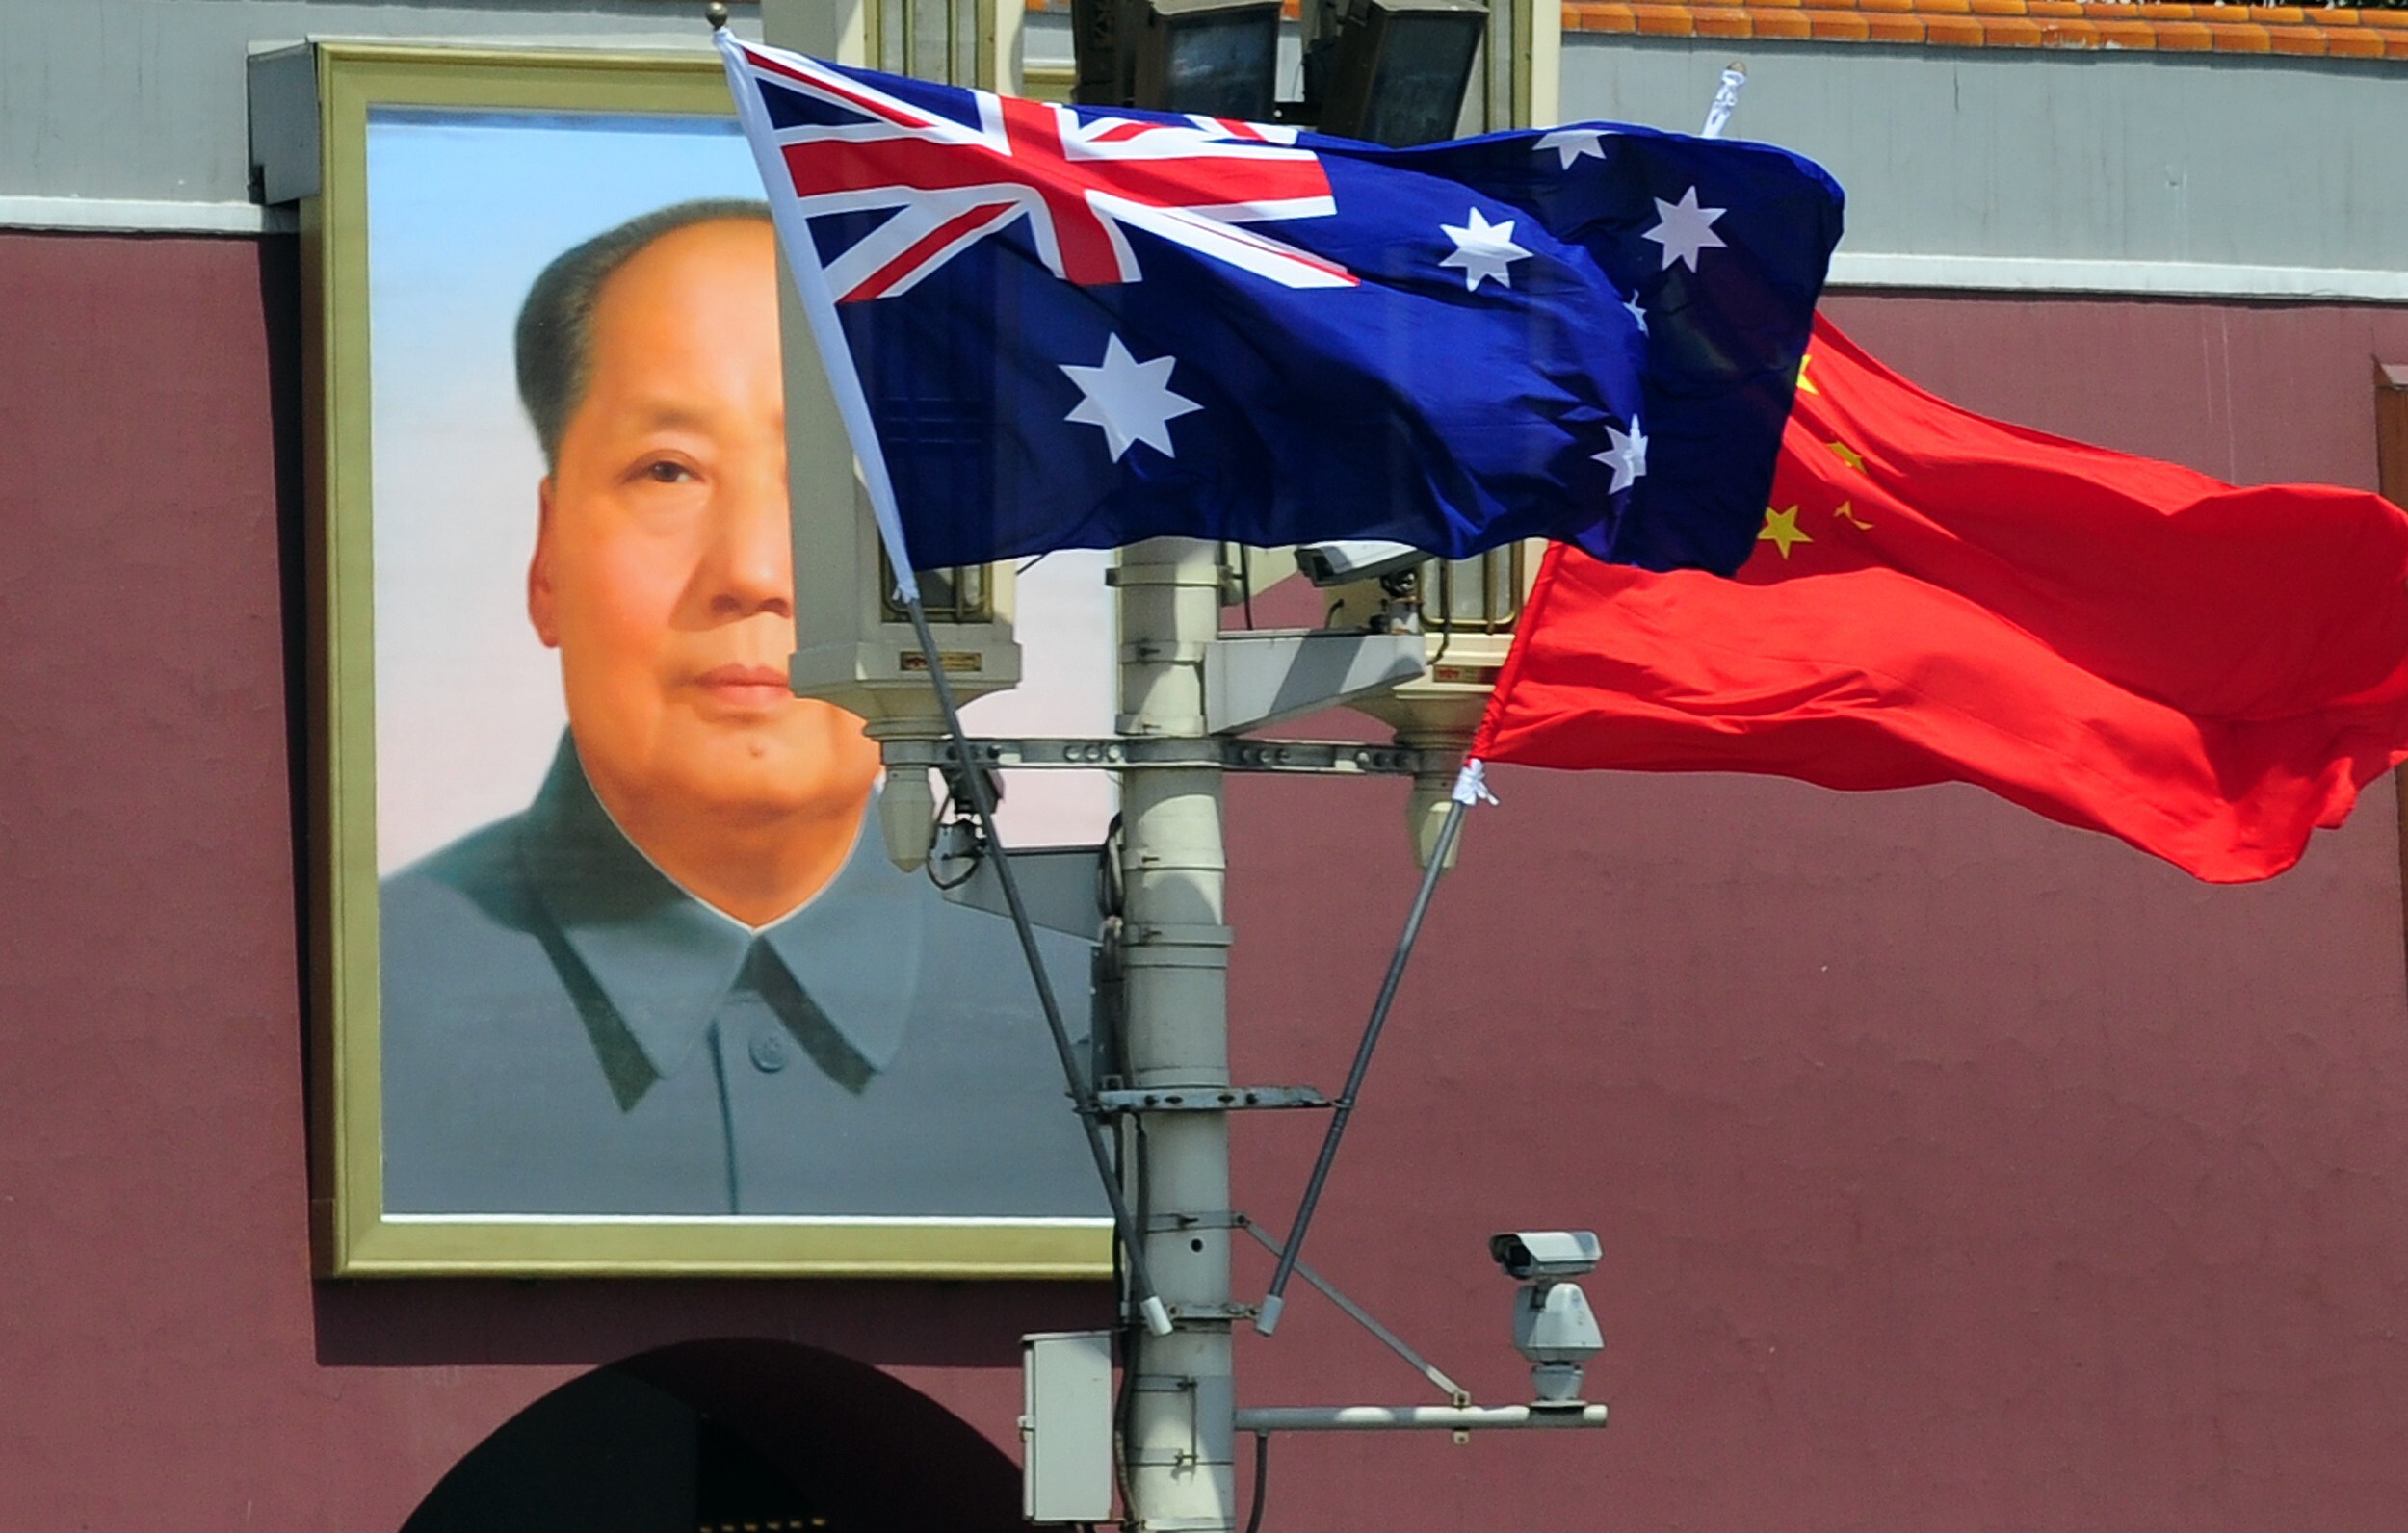 The national flags of Australia and China are displayed in front of a portrait of Mao Zedong in Tiananmen Square, Beijing, during a visit by Australia’s then prime minister Julia Gillard to China on April 26, 2011. Photo: AFP